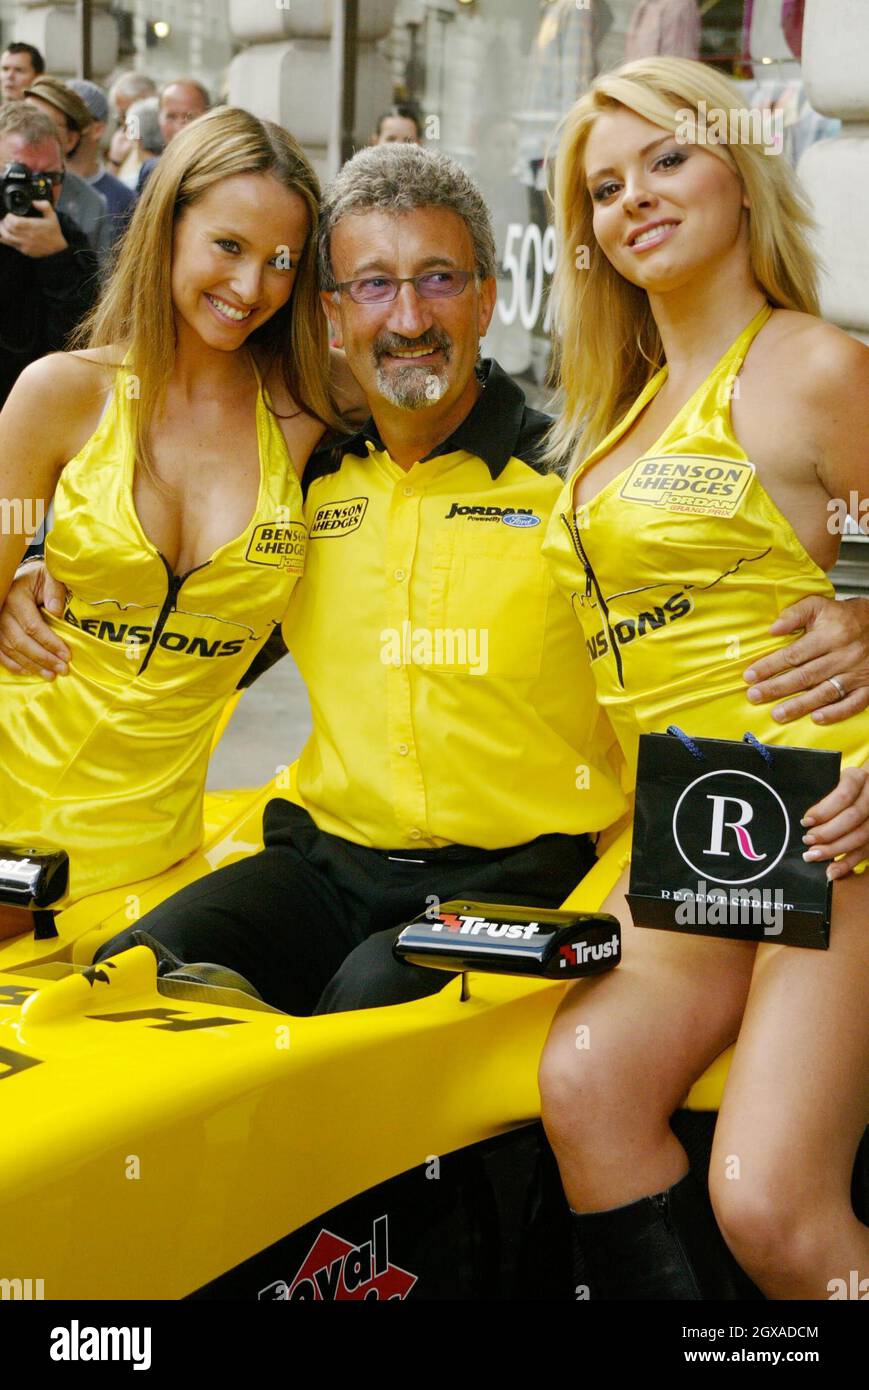 Eddie Jordan with pit babes Michelle Clack (blonde) and Leah Newman  (brunette). Together they launched the Regent Street Formula 1 Parade  taking place on 060704. The trio, who announced details of the